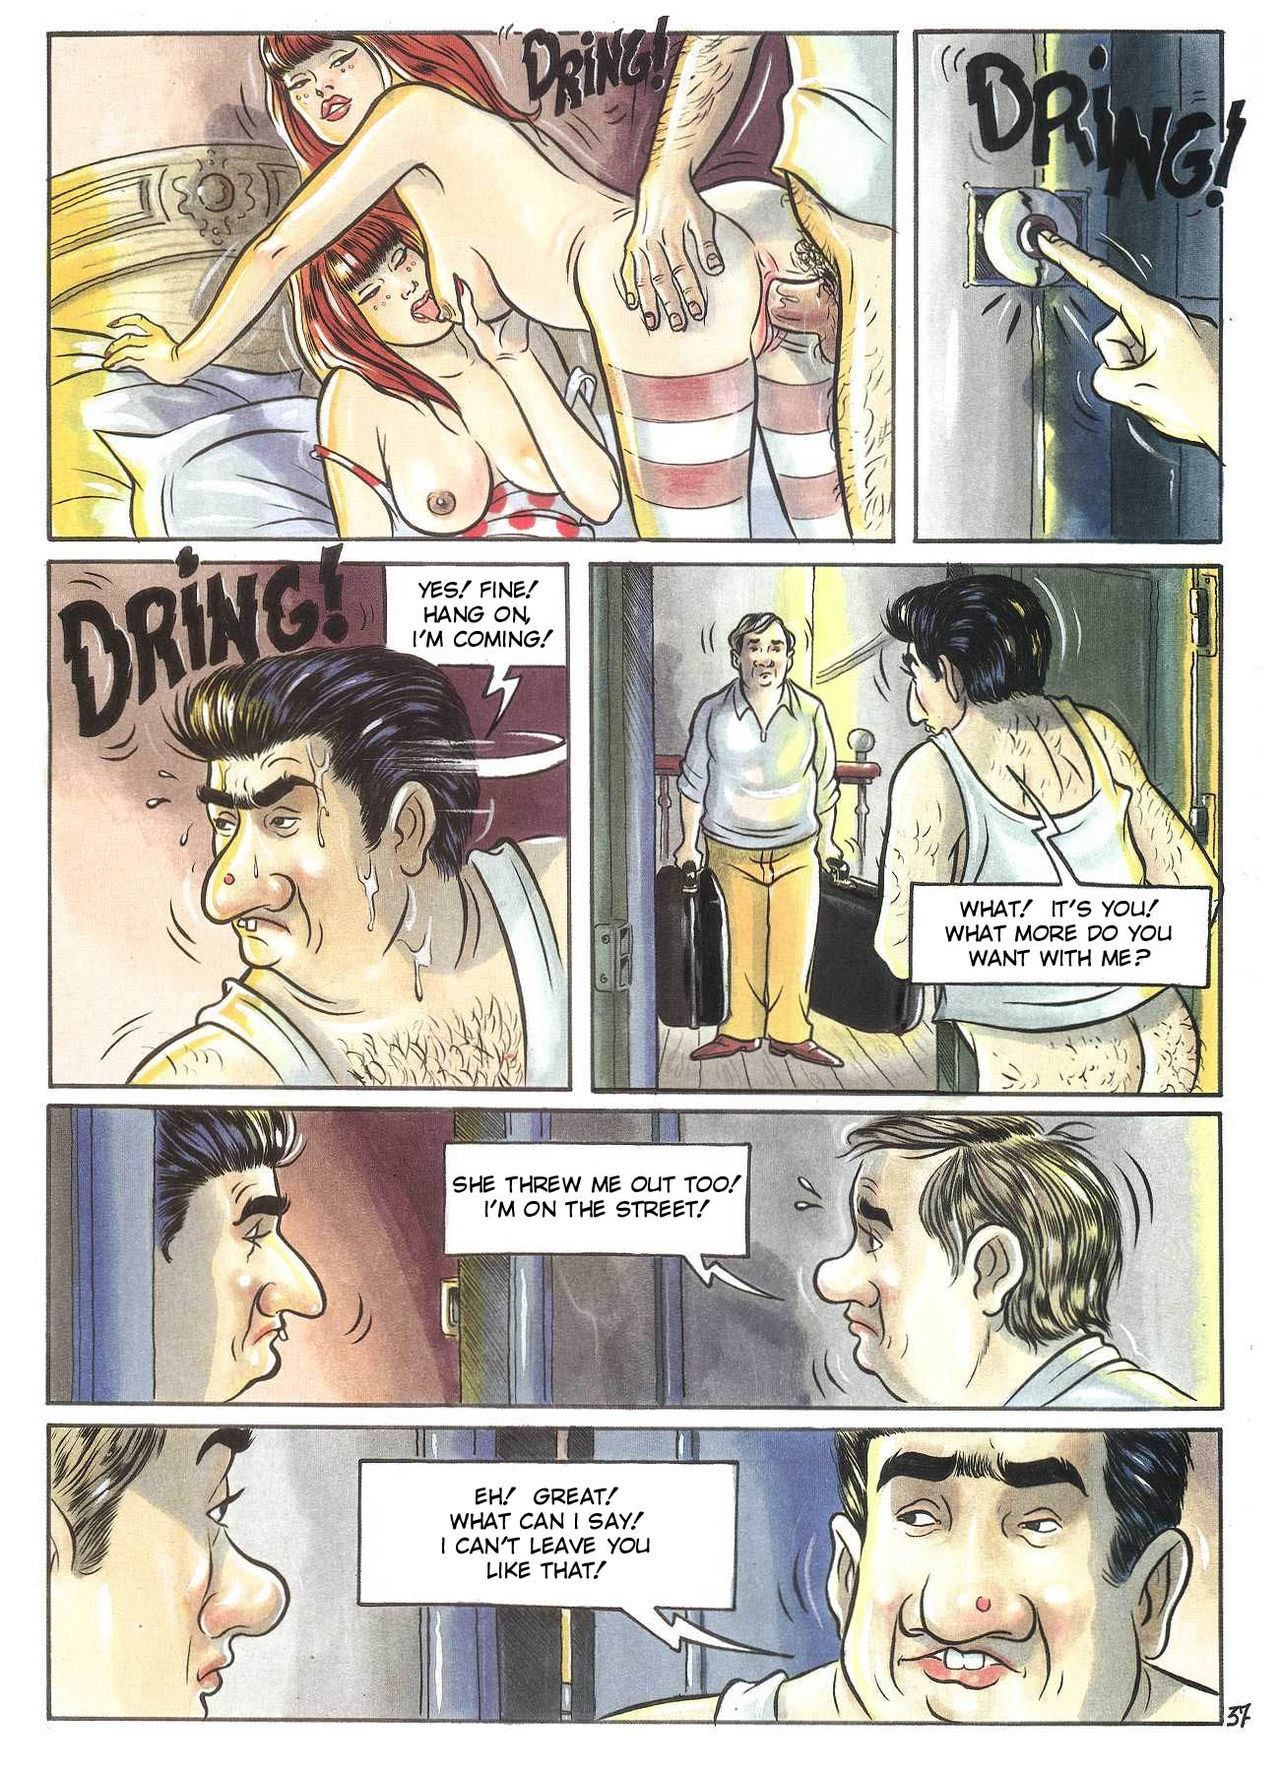 The Maniac Berger, Rocheret page 38